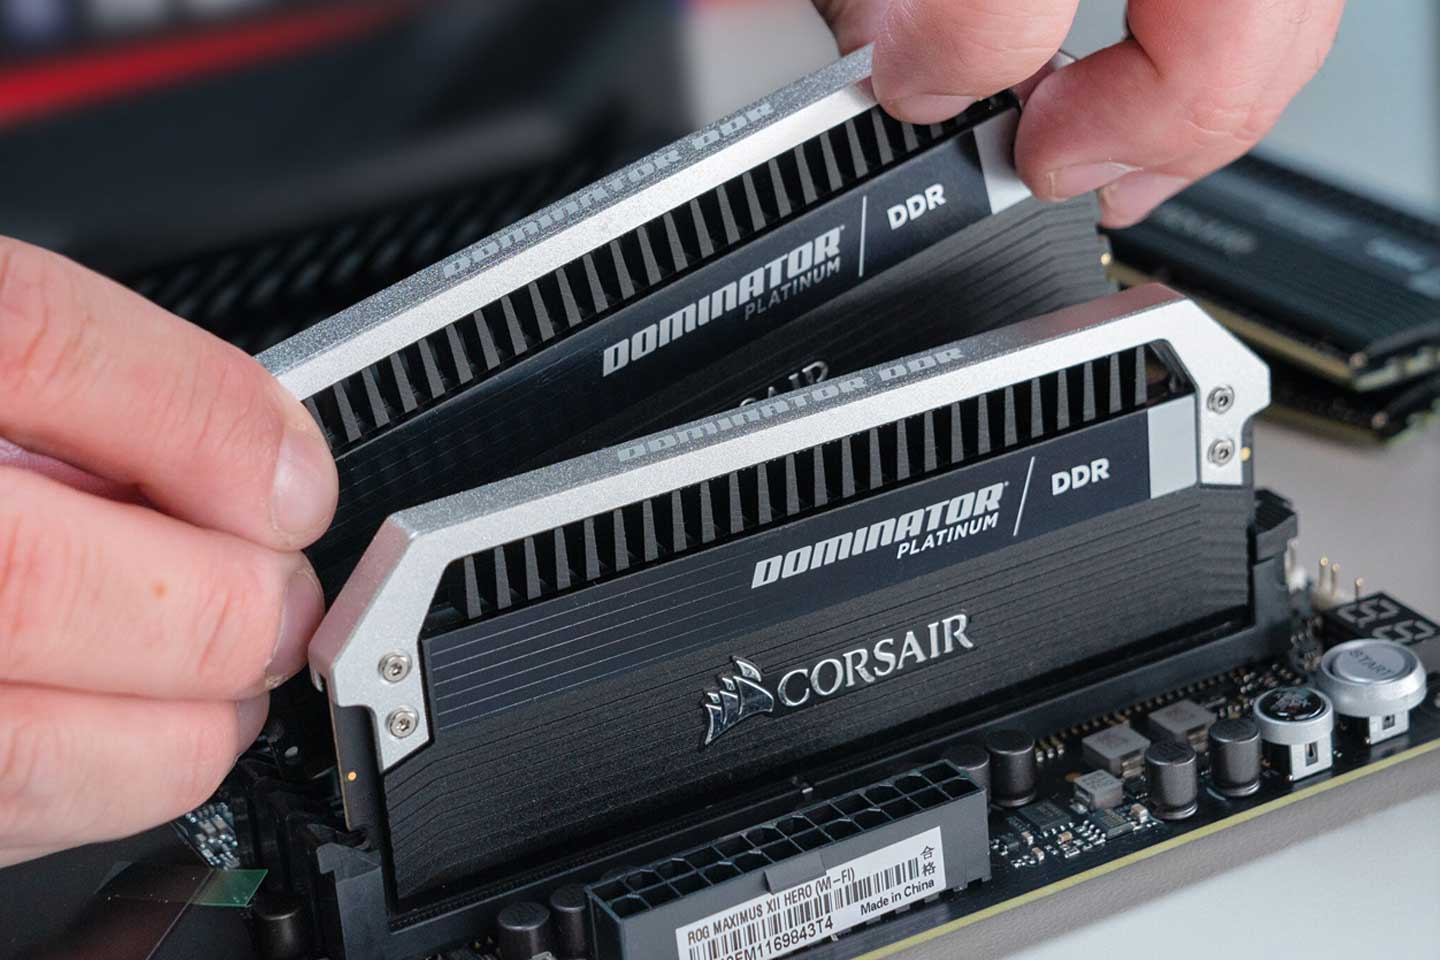 Ballistix memory cards being placed in a motherboard